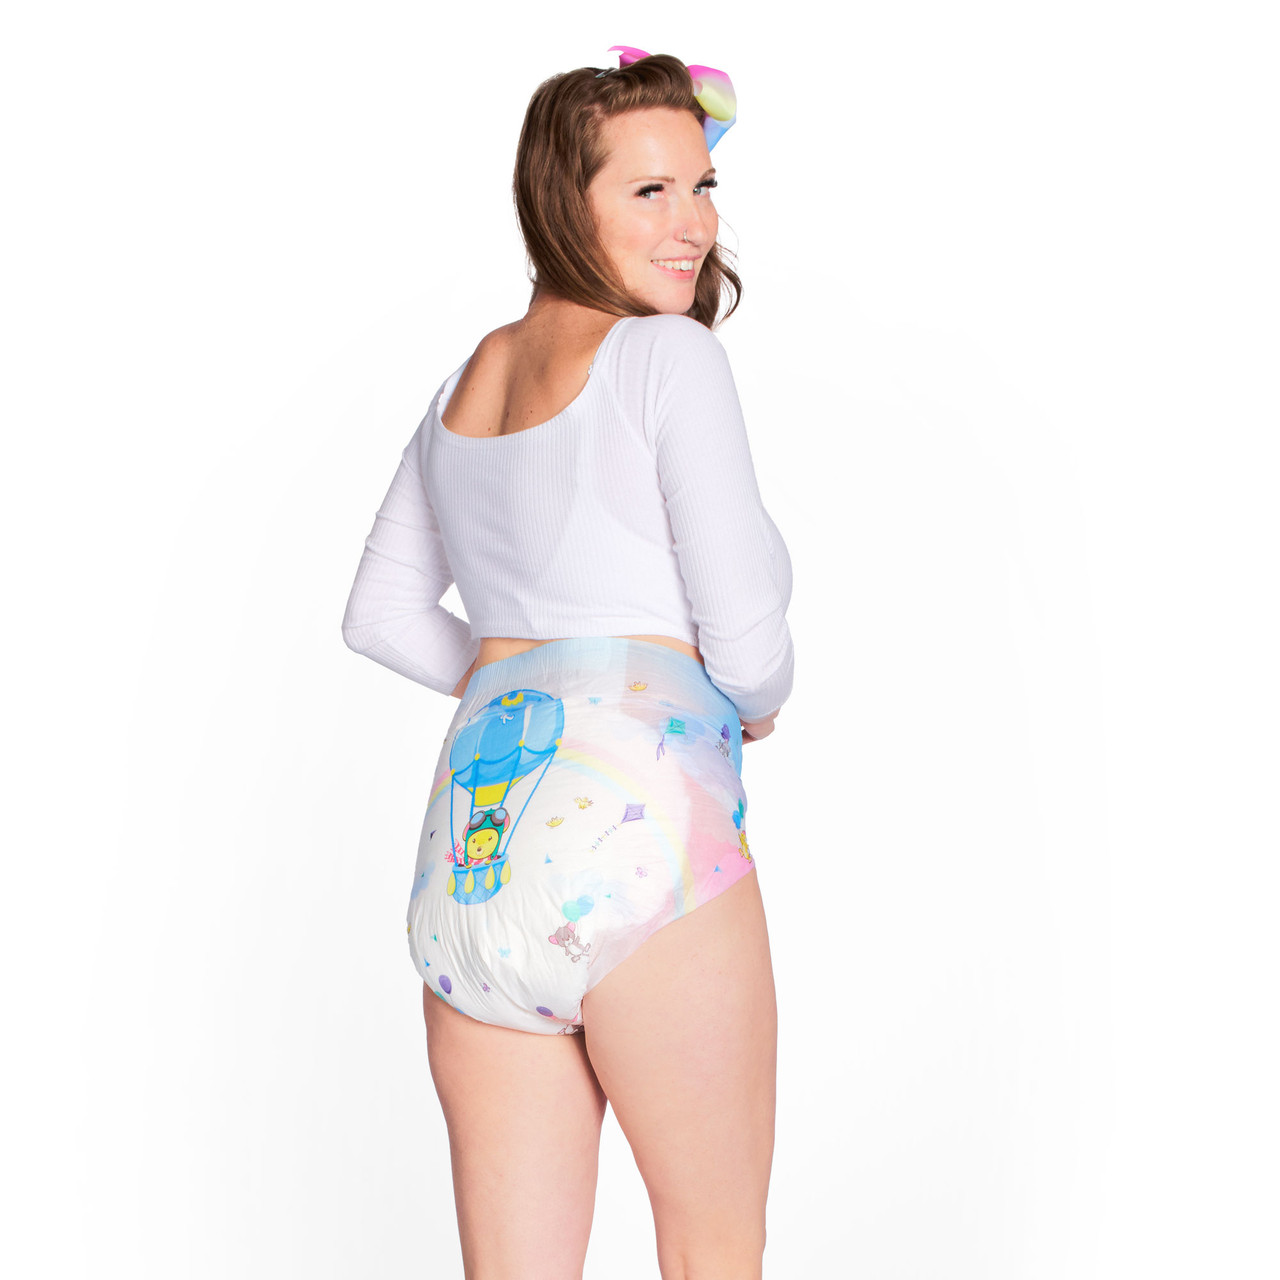 Drift Off Into A Dream With Rearz New Daydreamer Adult Diapers #abdldiaper # rearz #daydreamer 